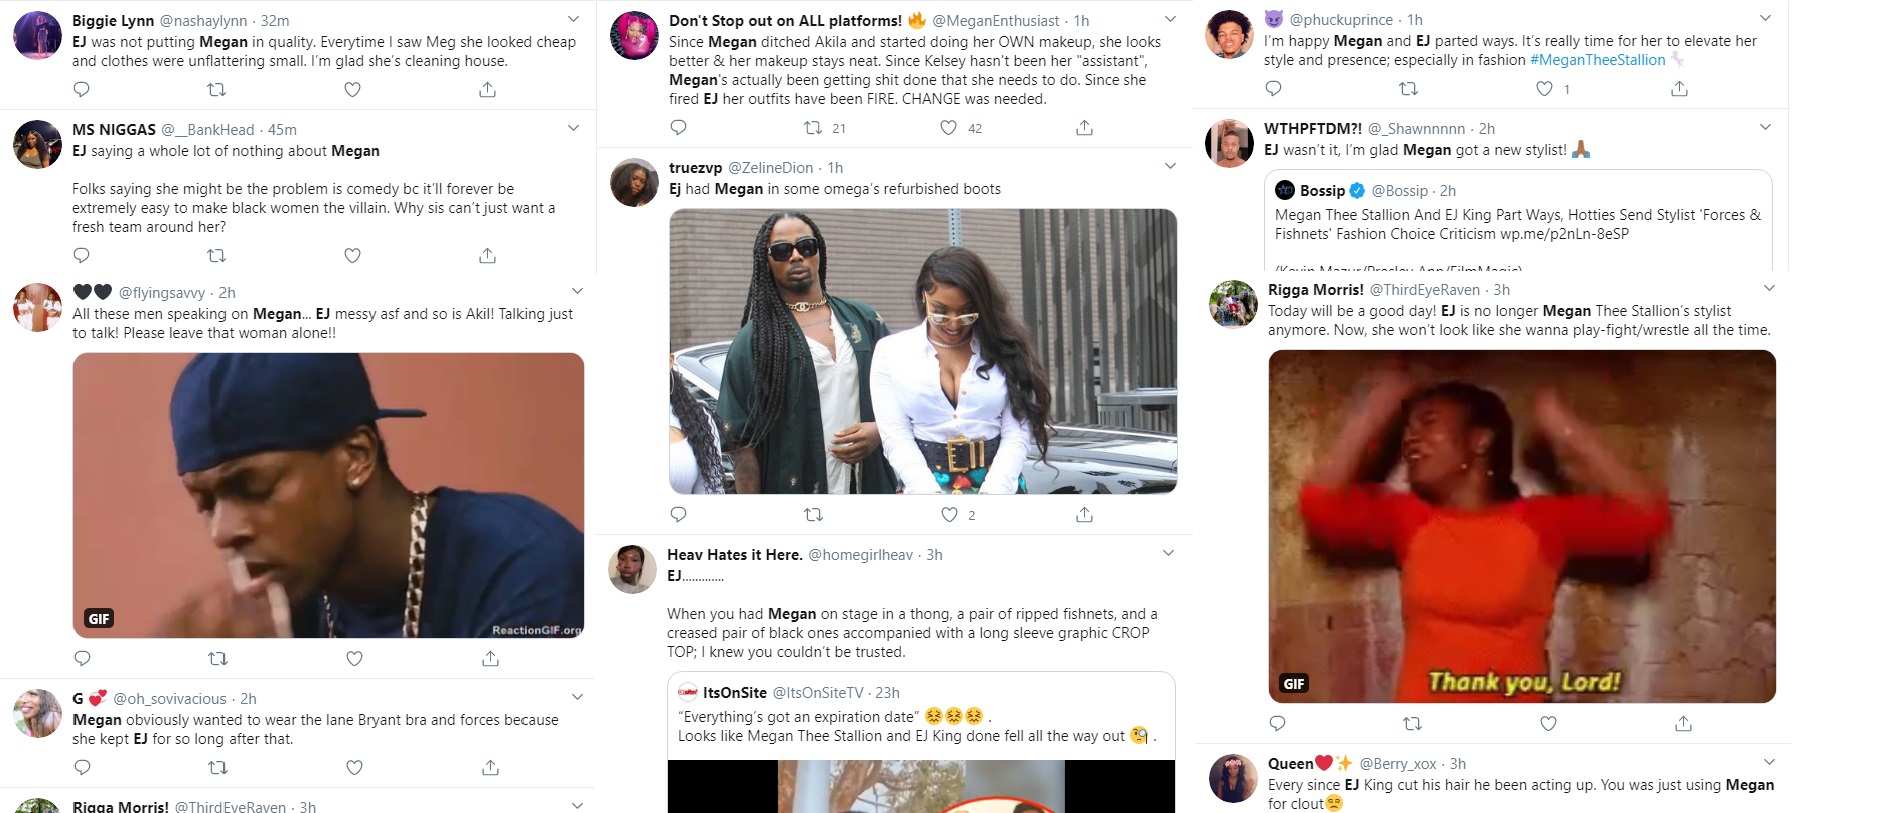 Megan Thee Stallion has parted ways with EJ King, her longtime stylist. After tweeting about getting rid of whatever isn't helping you, some think she is throwing off on EJ. On Twitter, fans are speculating about Megan Thee Stallion and EJ King possibly beefing.